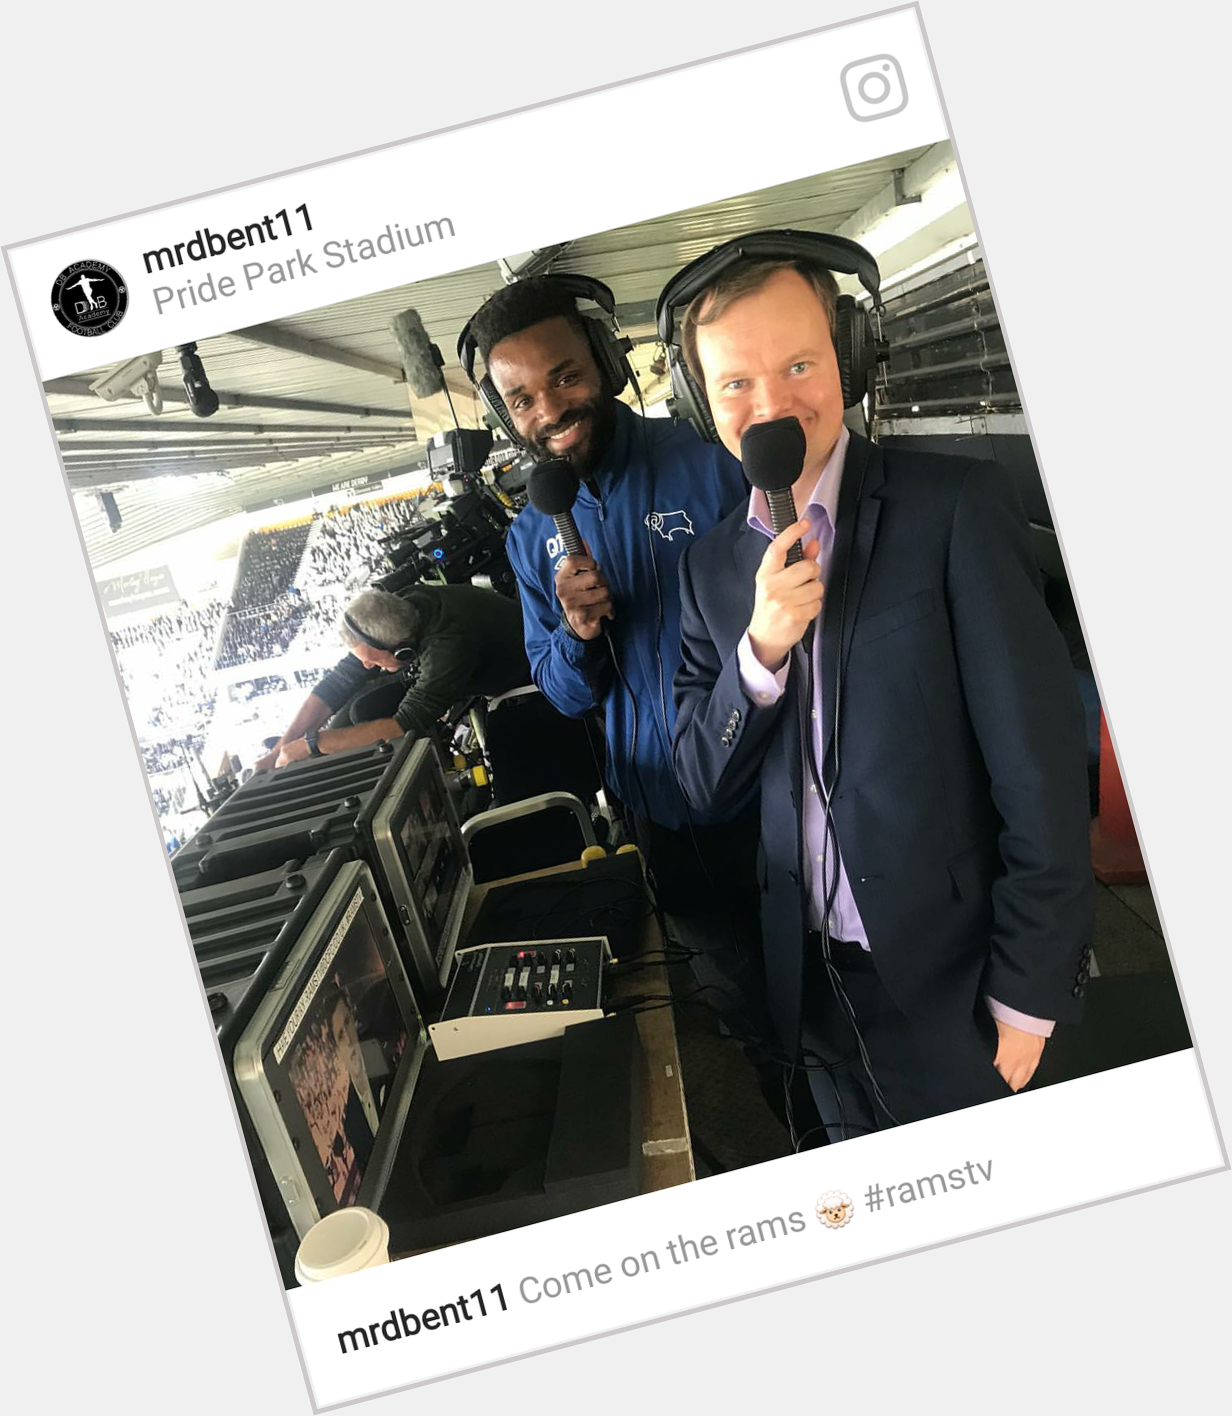 Happy Birthday Darren Bent and good luck with Burton. Enjoyed commentating with Benty earlier this season! 